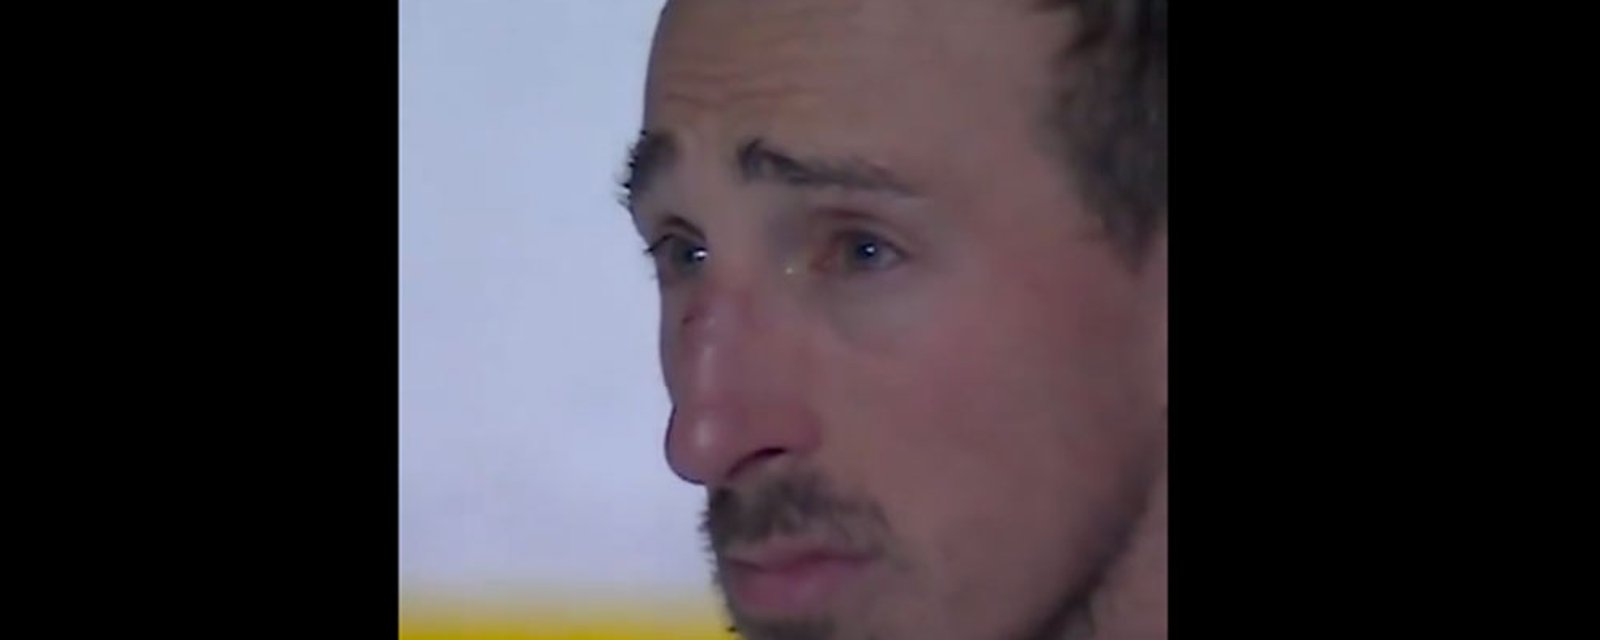 Marchand tears up during emotional tribute at TD Garden